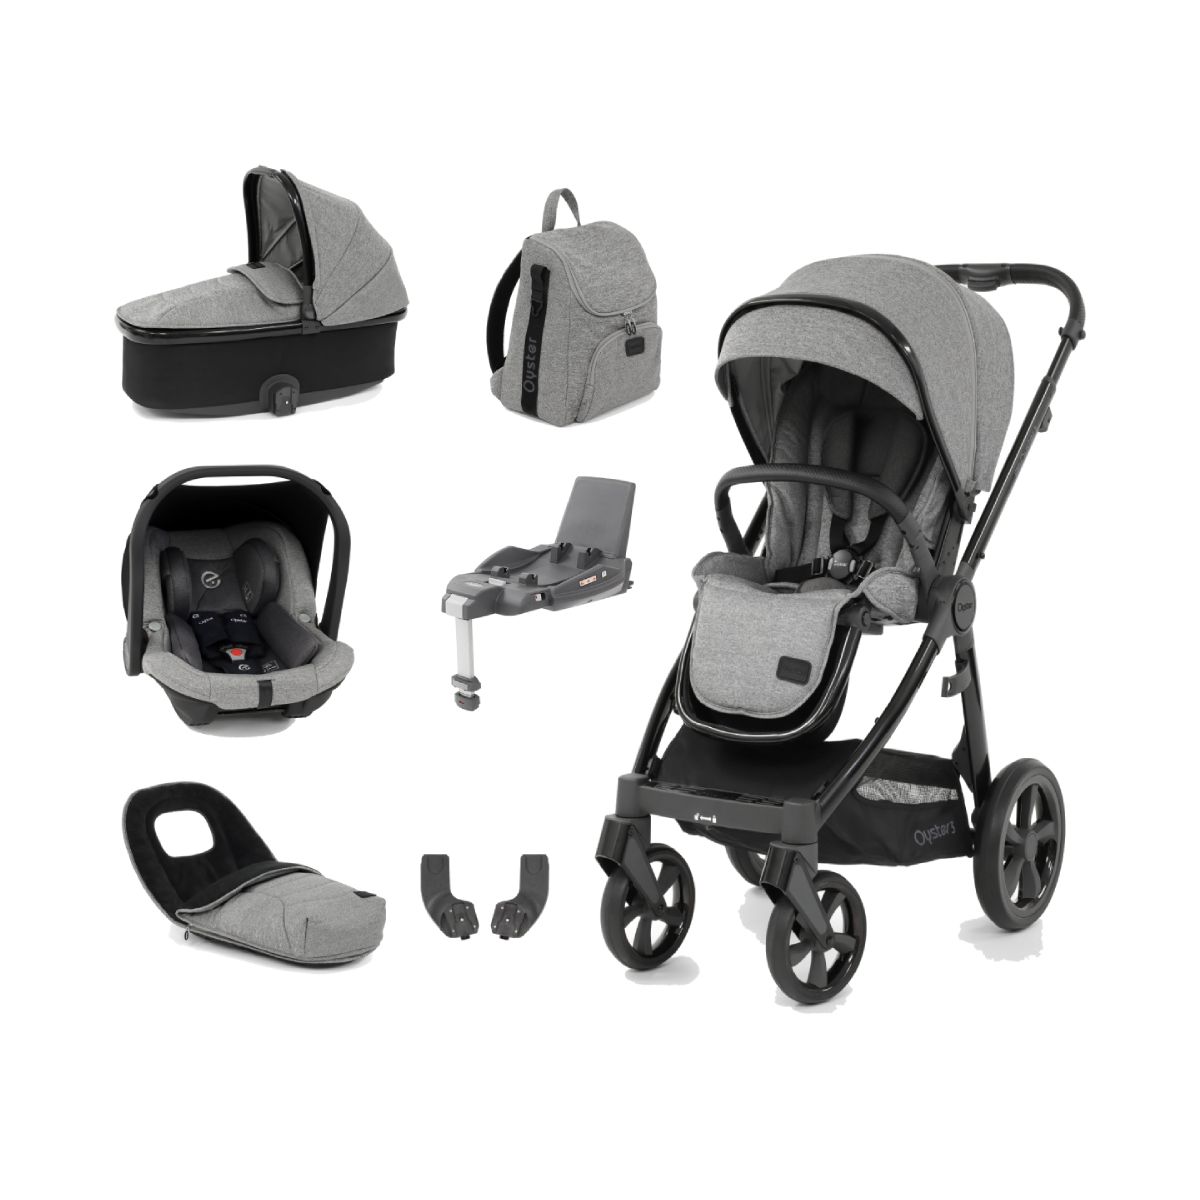 BabyStyle Oyster 3 Black Chassis Edition 7 Piece Luxury Travel System